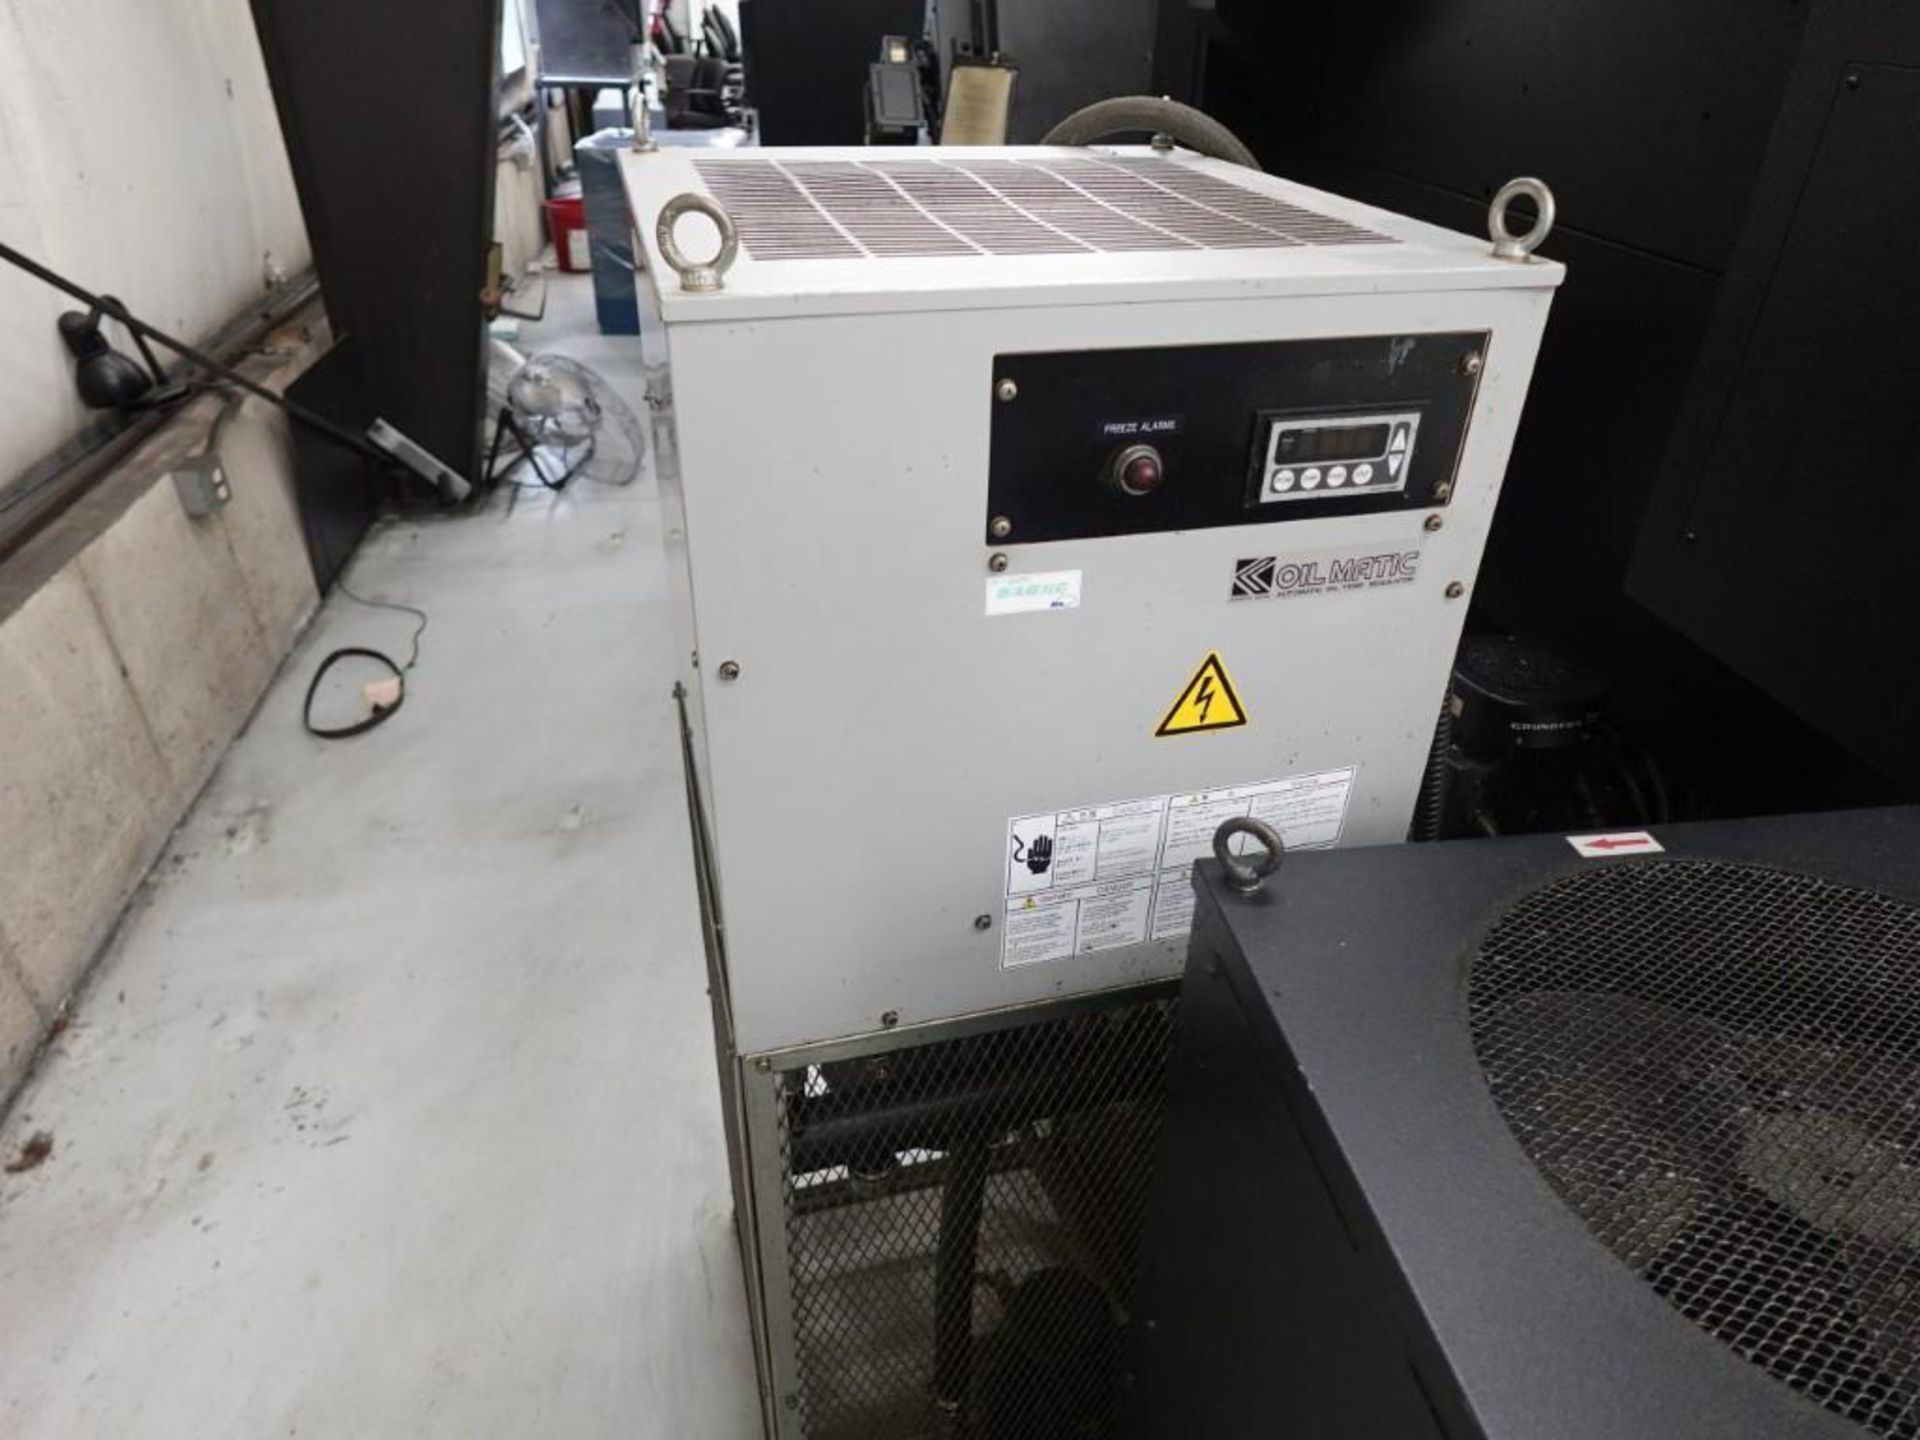 Mazak Variaxis 500-5X-II 5-Axis CNC Vertical Machining Center with Pallet Changer - Image 6 of 15